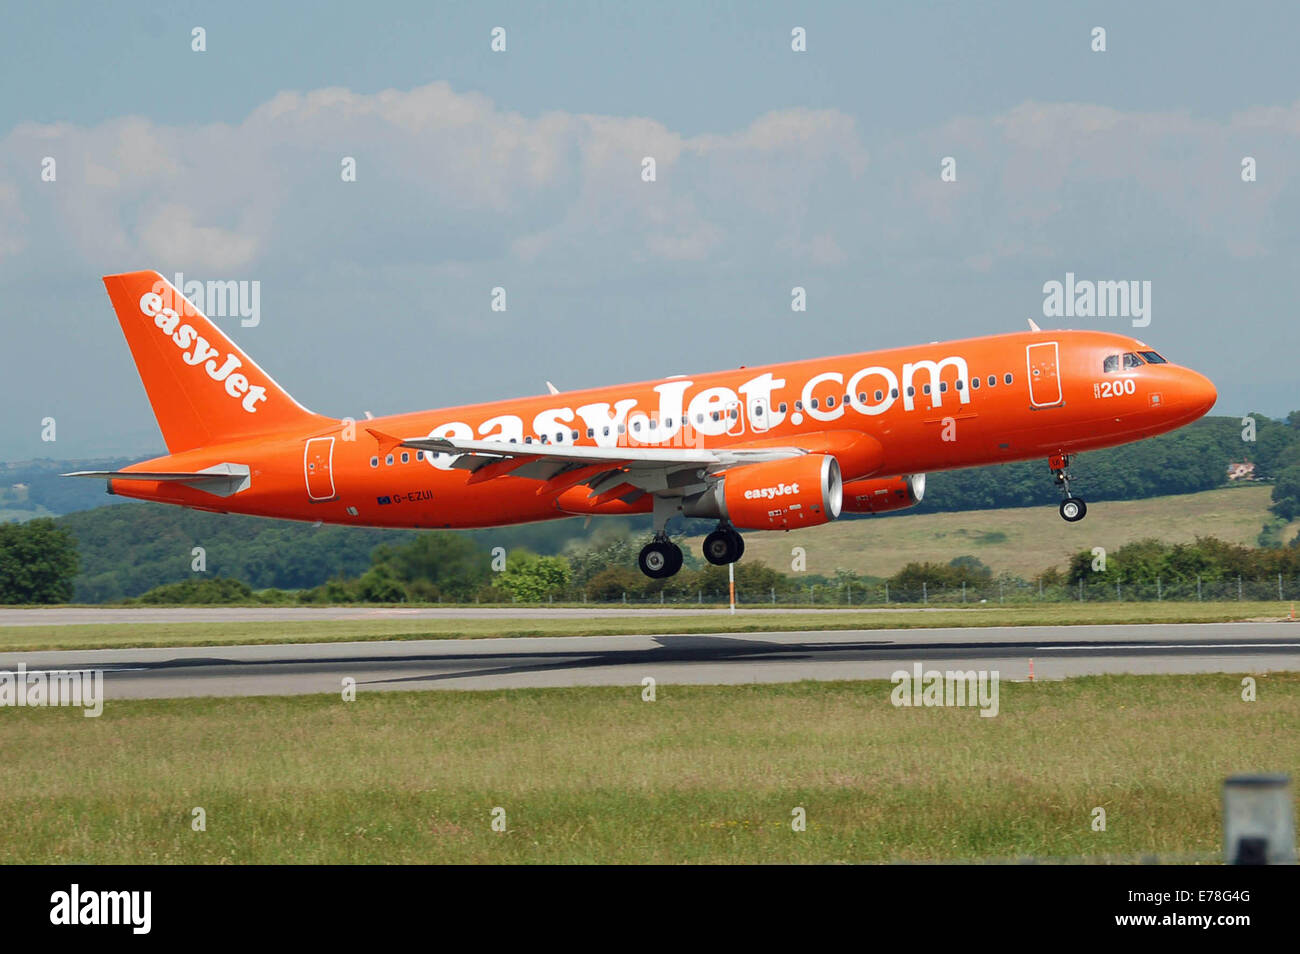 Easyjet Airbus A320-200 (G-EZUI) flares at Bristol Airport, Bristol, England. The "200" marking and the reversed colours cel Stock Photo